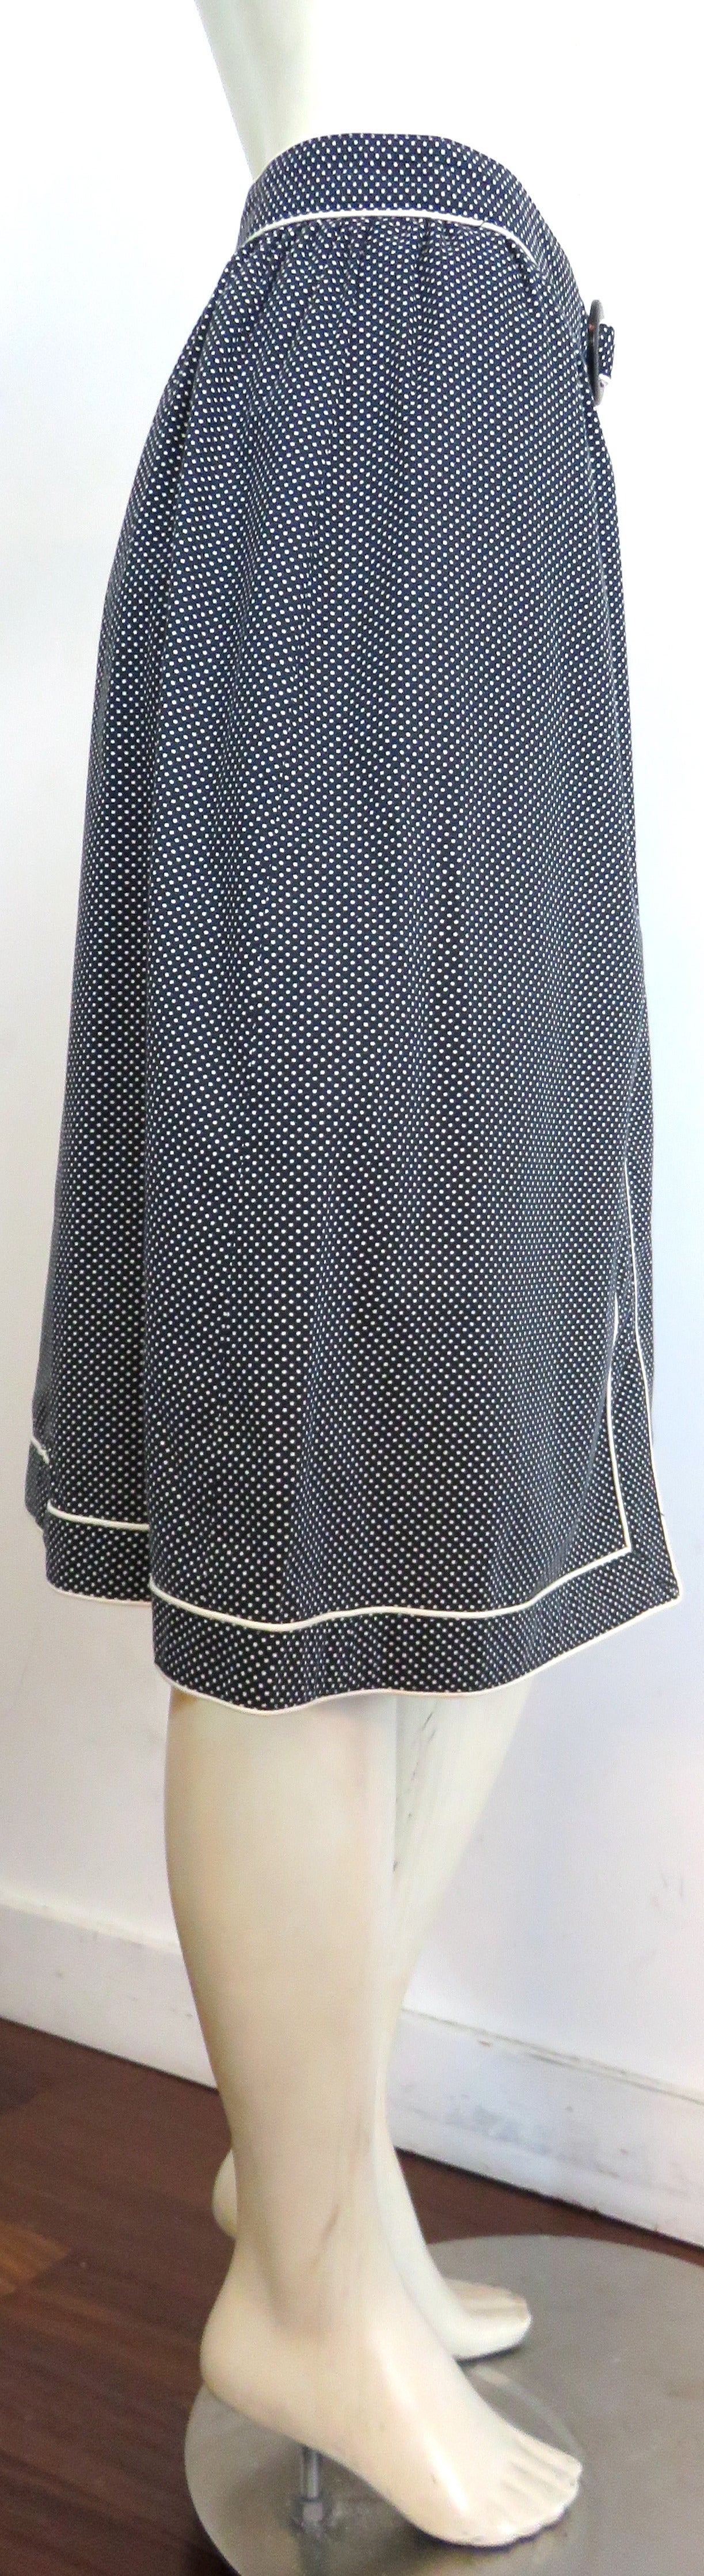 1980's VALENTINO Dotted skirt In Excellent Condition For Sale In Newport Beach, CA